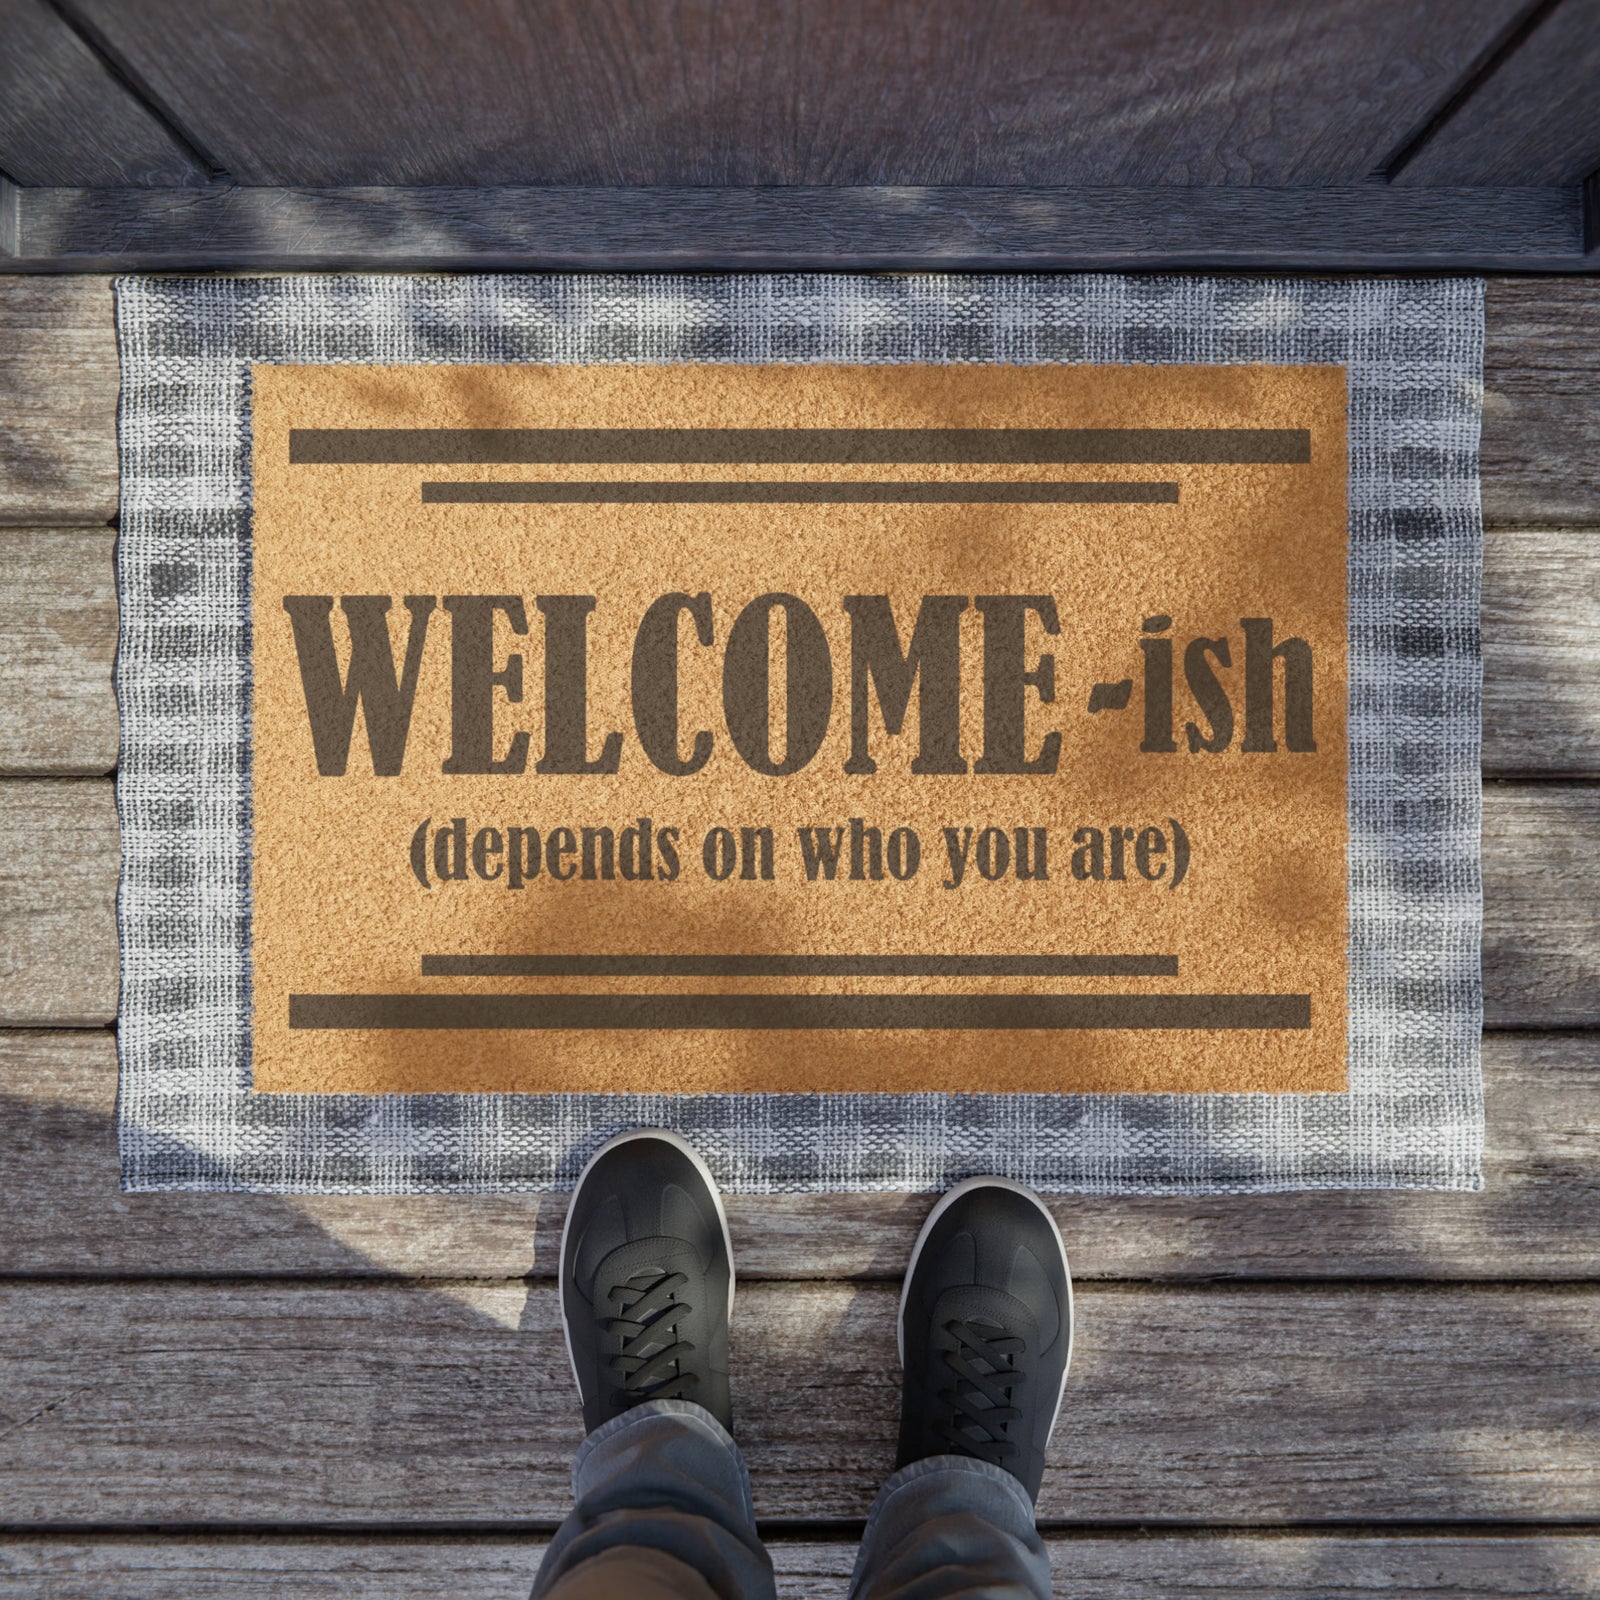 Funny Welcome Doormat: Adding Humor to Your Home Entrance